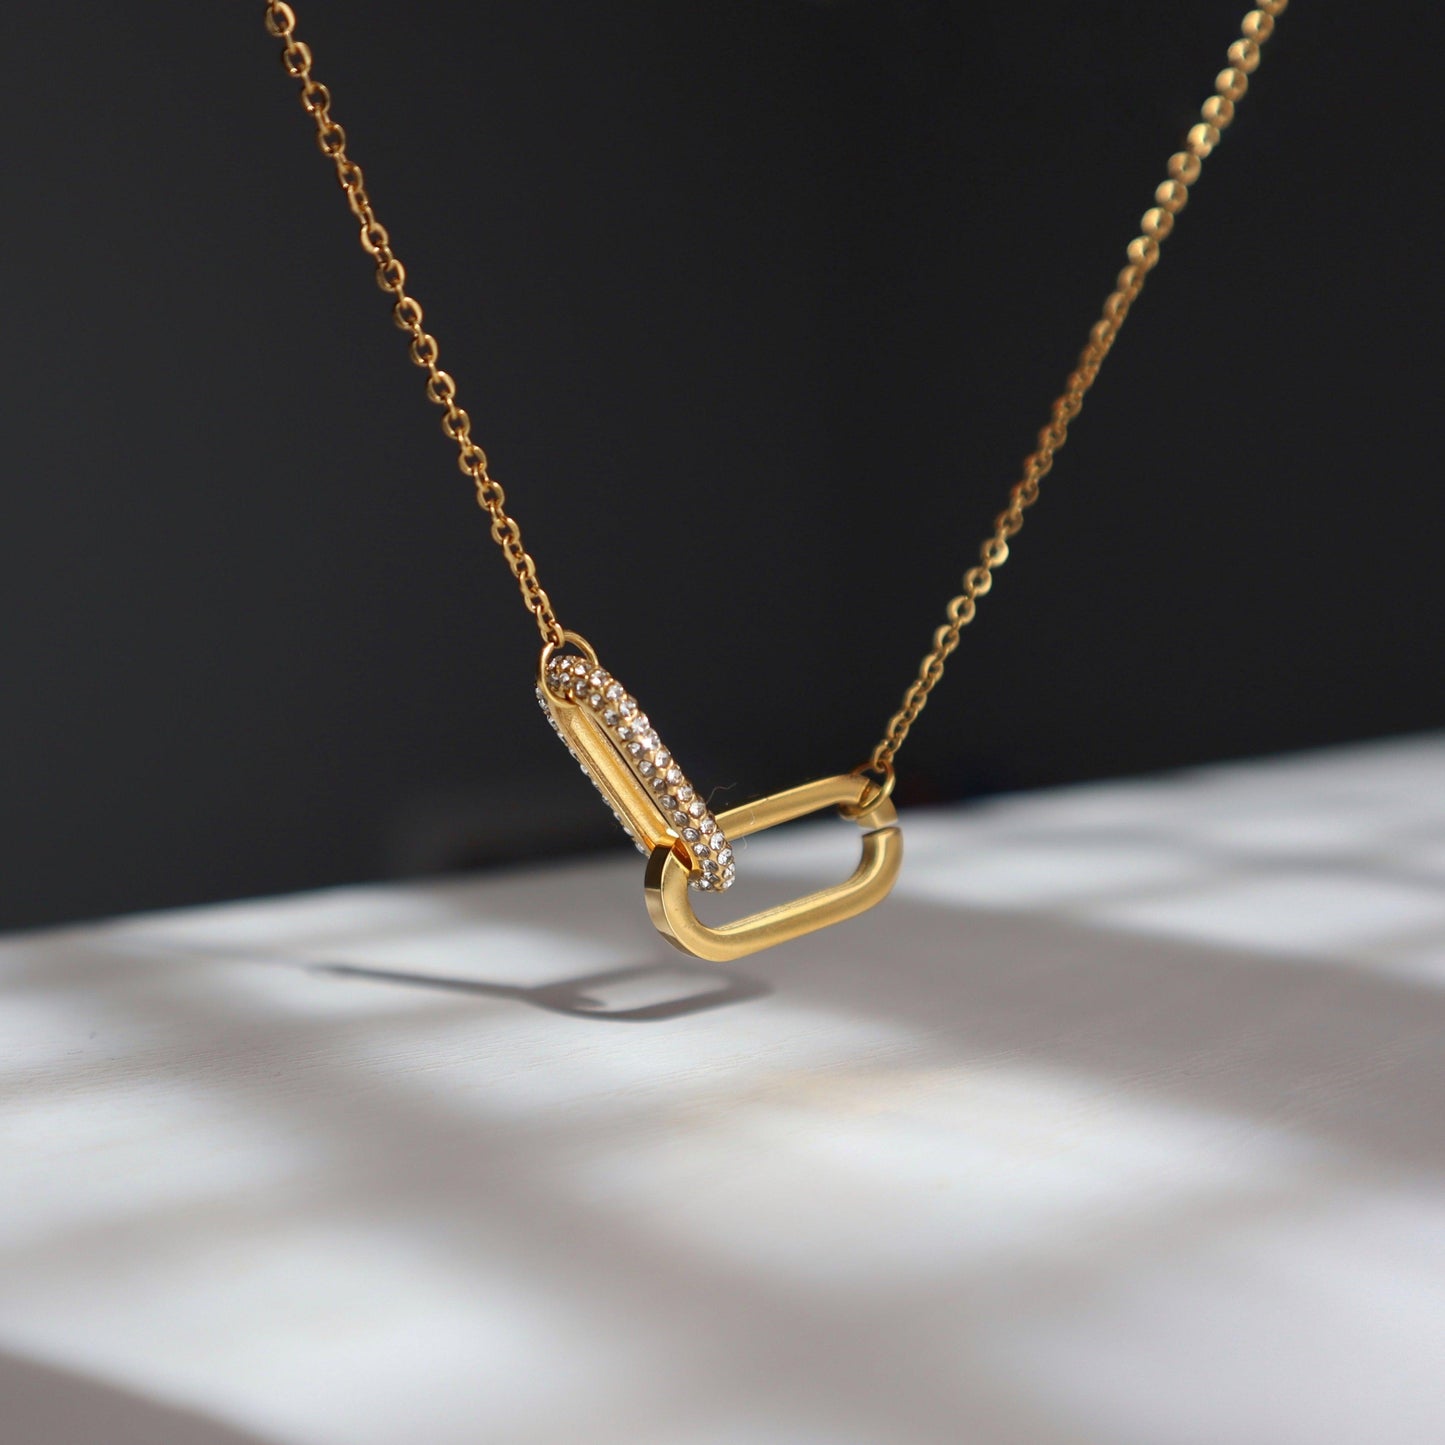 Linked Necklace - JESSA JEWELRY | GOLD JEWELRY; dainty, affordable gold everyday jewelry. Tarnish free, water-resistant, hypoallergenic. Jewelry for everyday wear